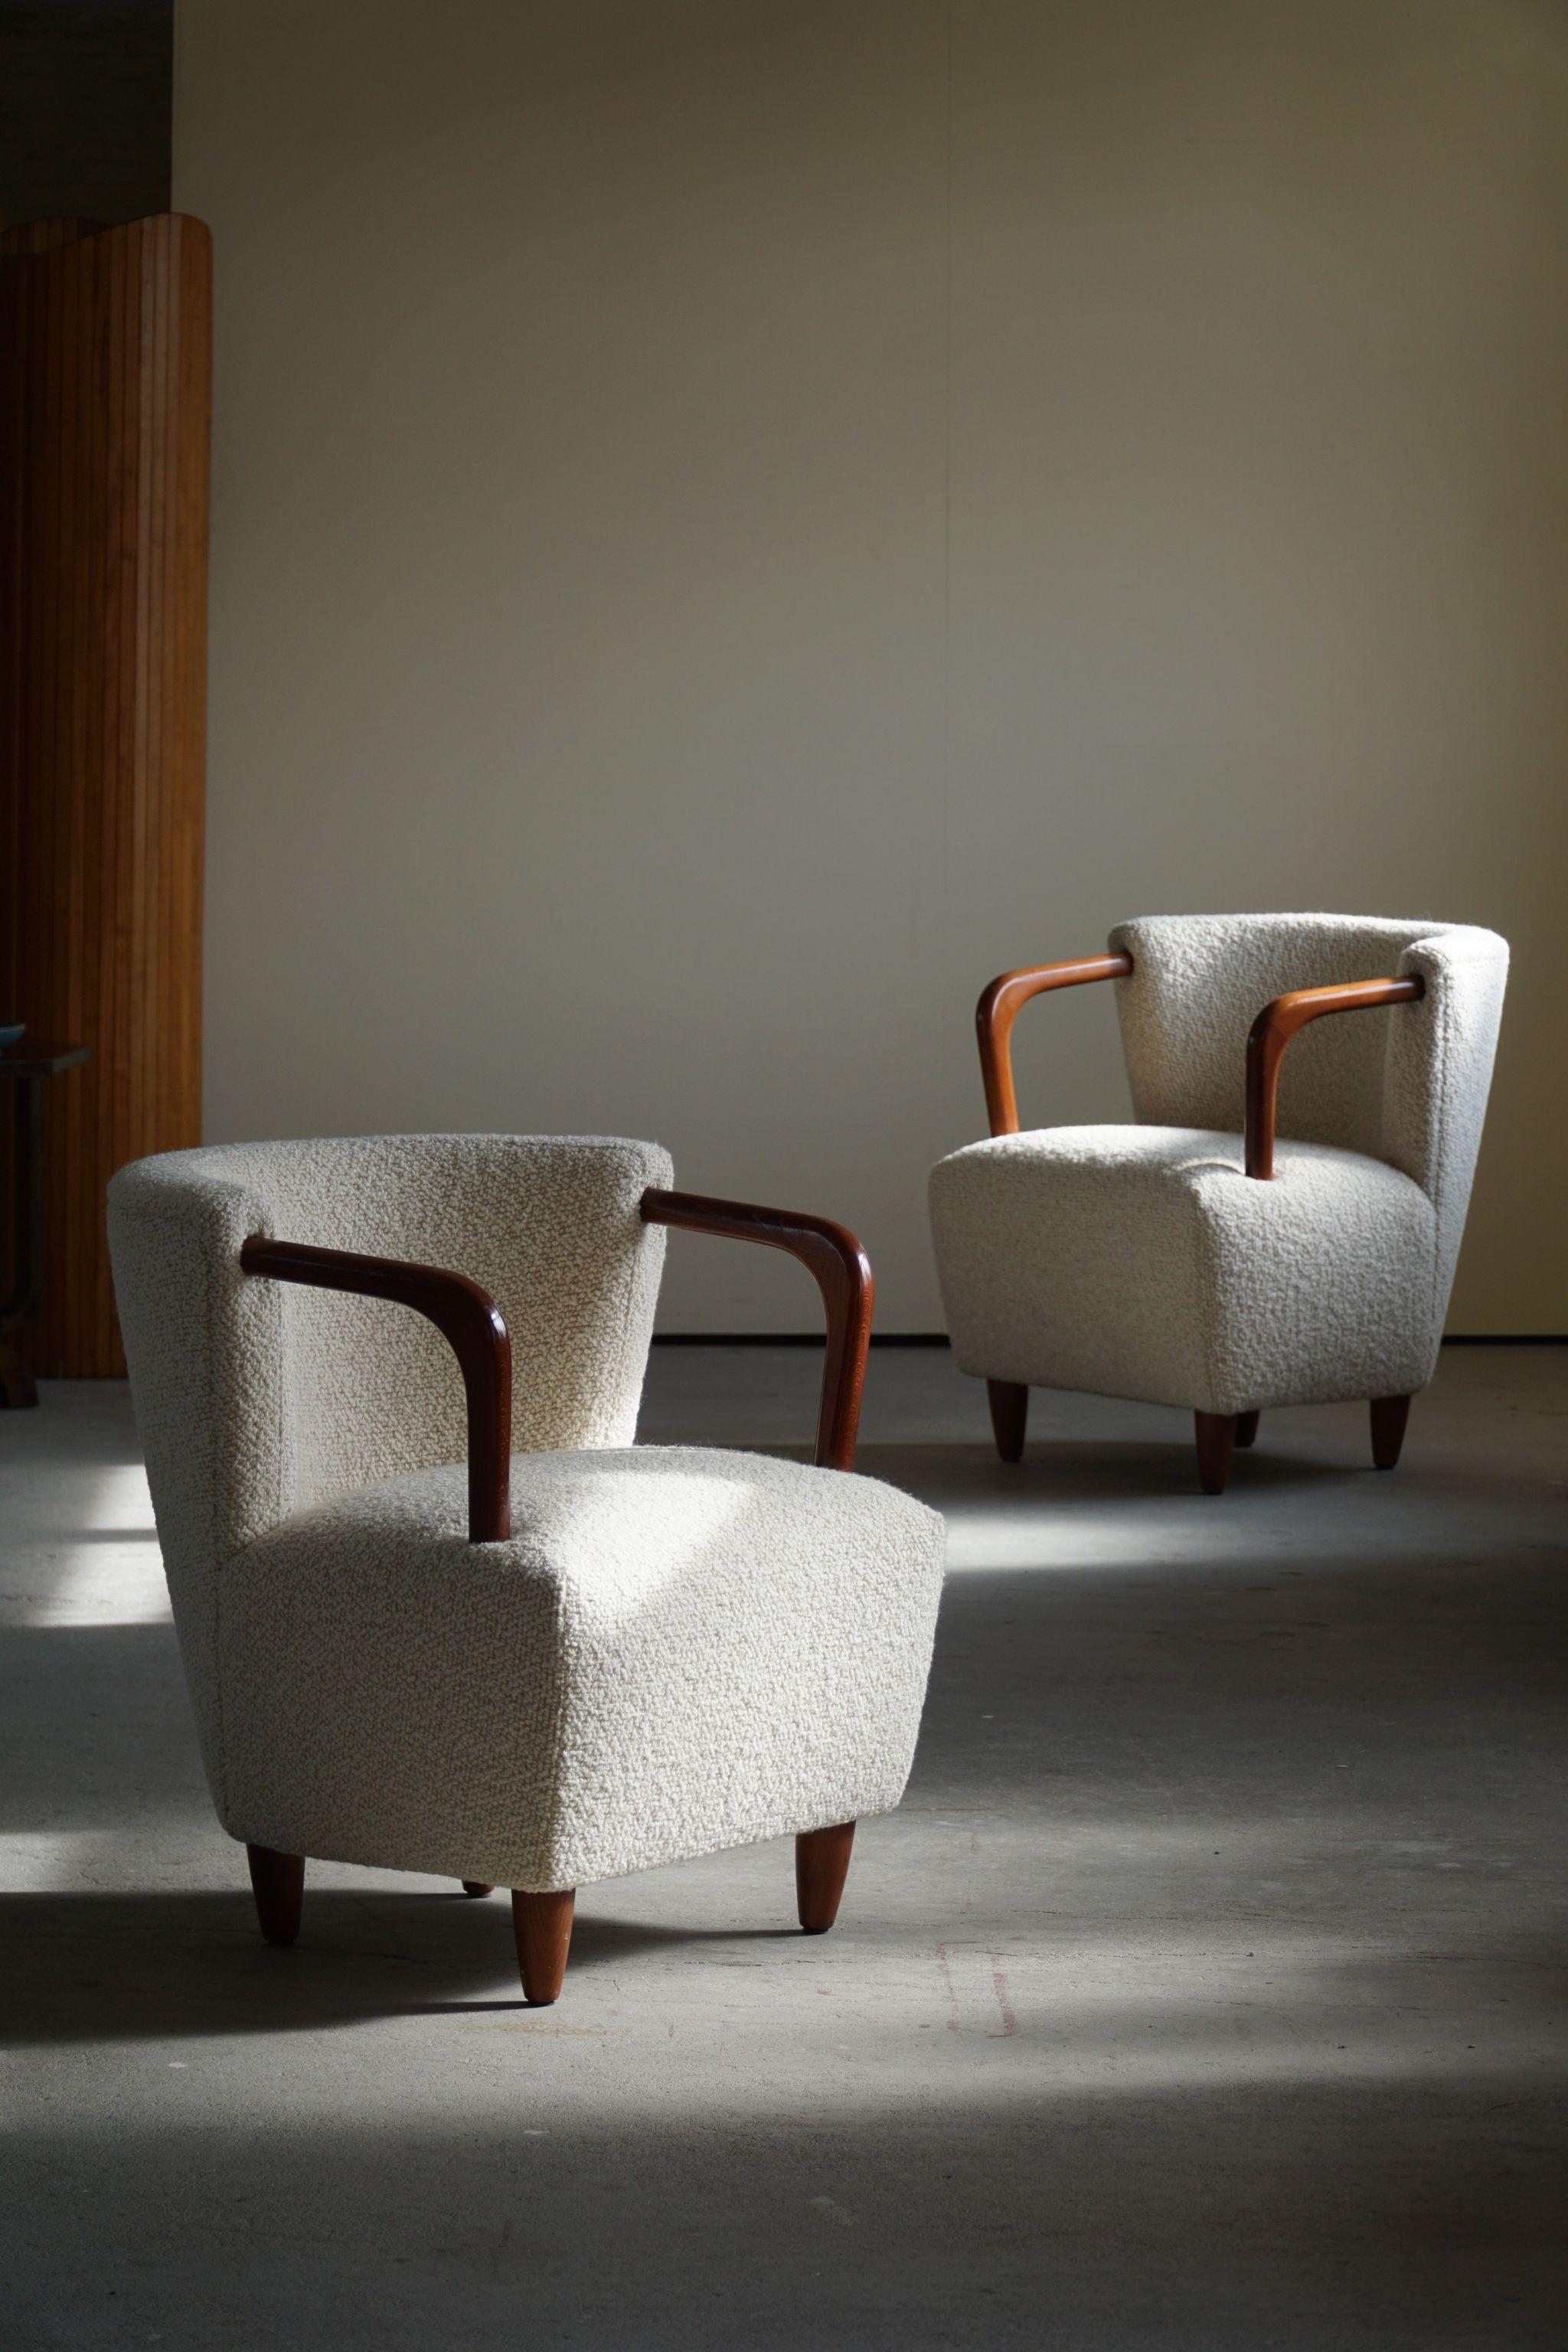 Exceptionel rare pair of Art Deco style lounge chairs, manufactured and designed in Denmark by a Danish Cabinetmaker. Late 20th century.
Reupholstered in luxury Bouclé, Storr 1501 (Eggshell) from BUTE fabric.
The pair is in perfect condition,